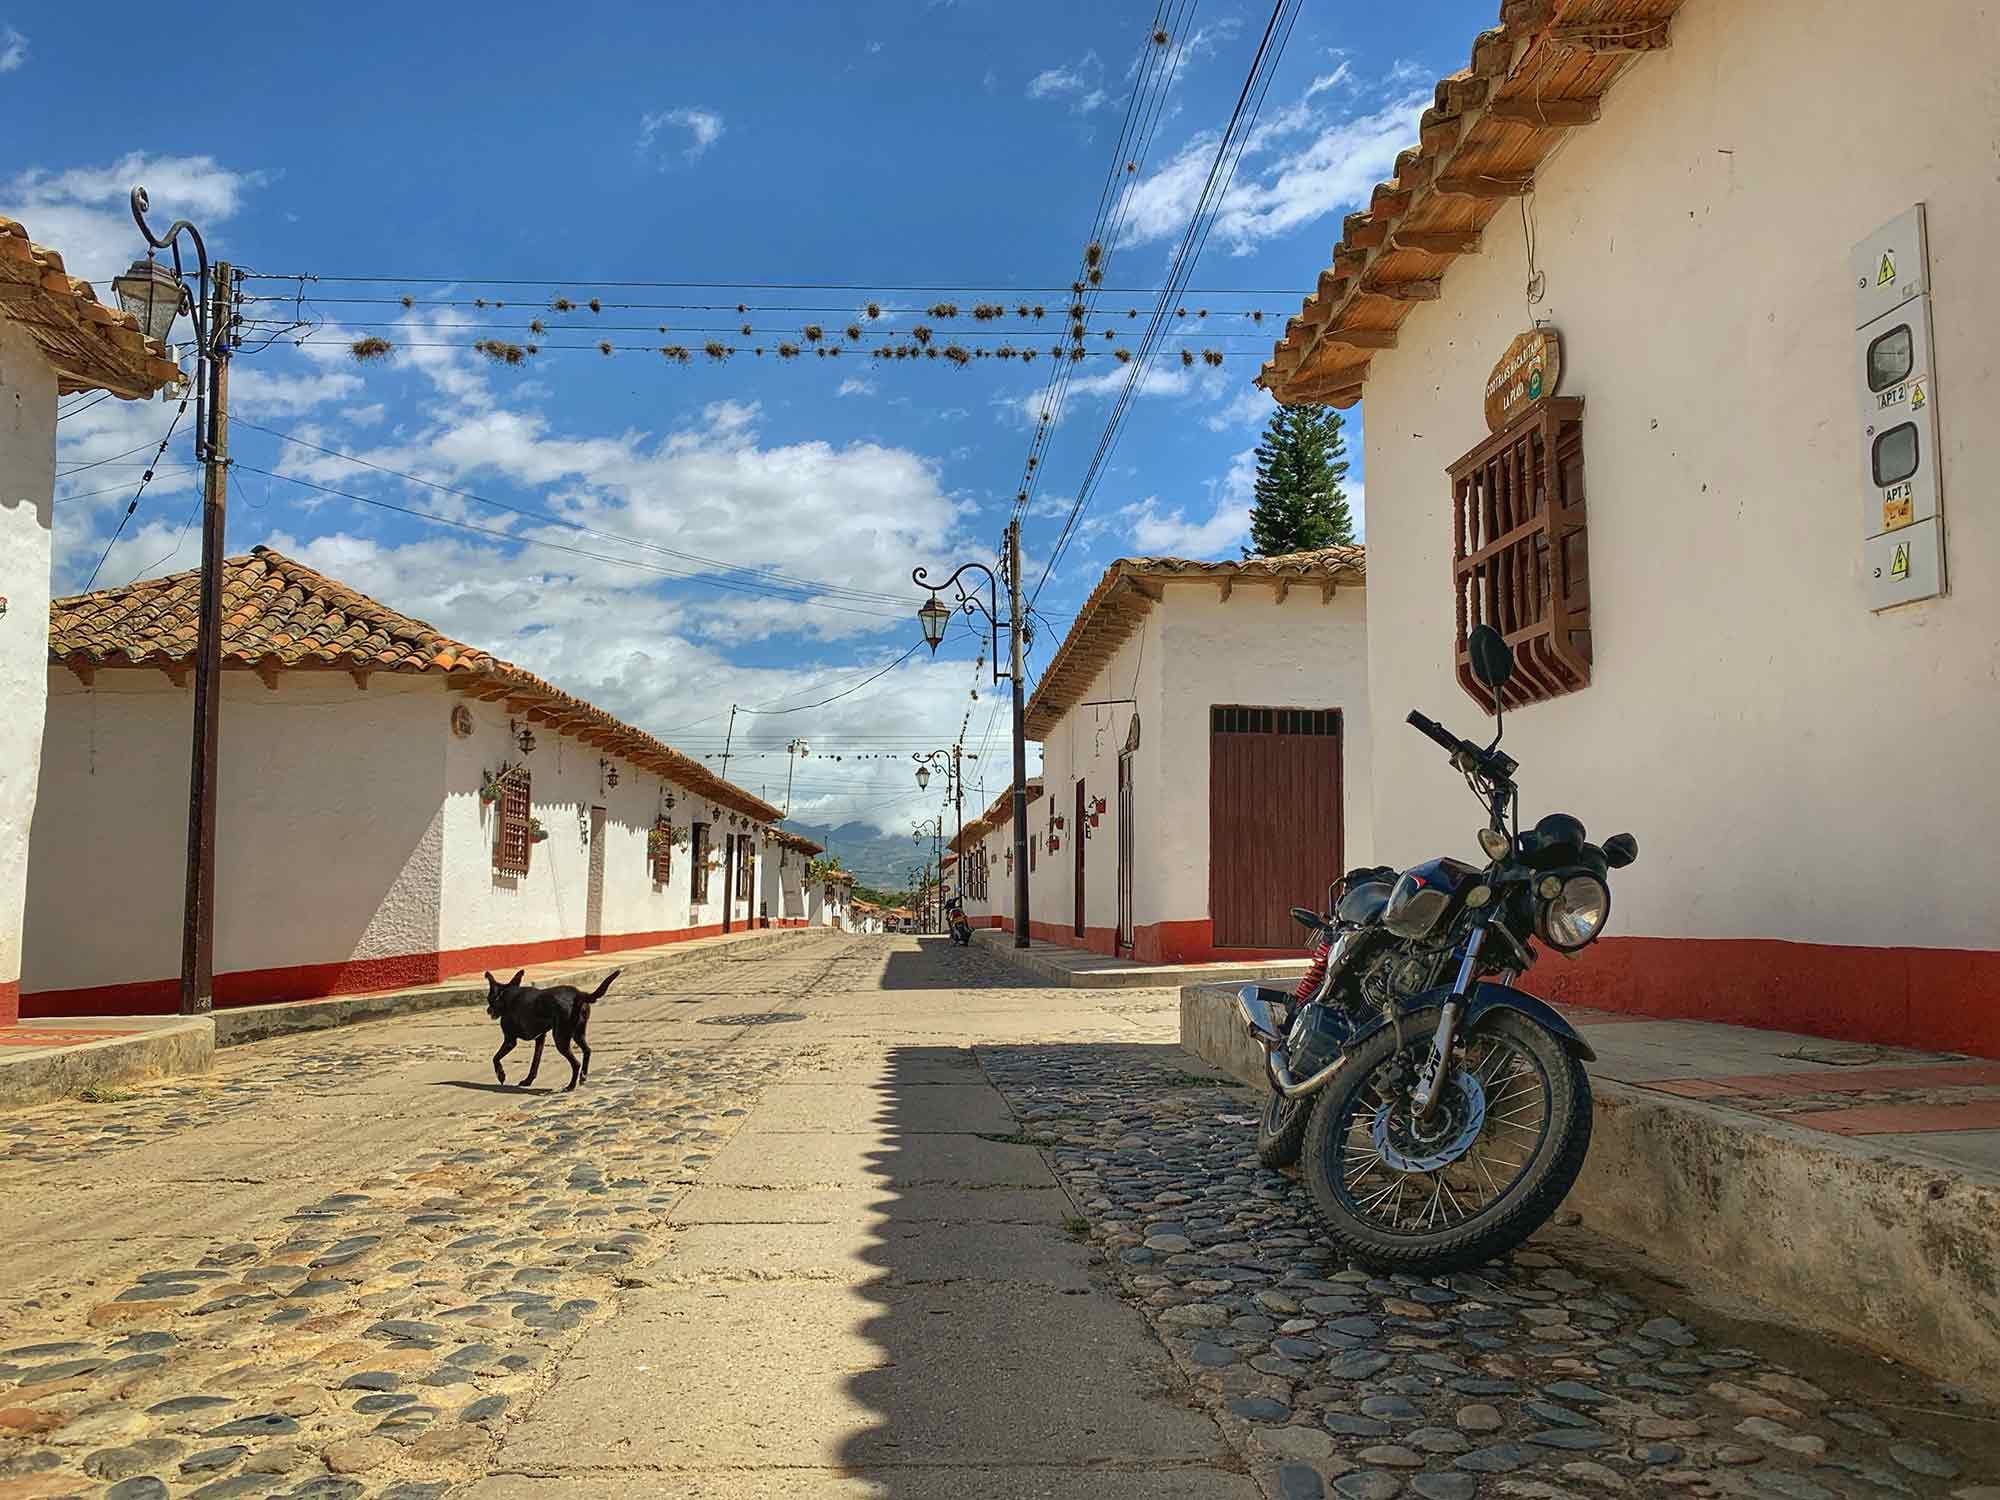 The quiet, lovely streets of Playa de Belen, Colombia, nestled within areas of strife near the Venezuelan border.